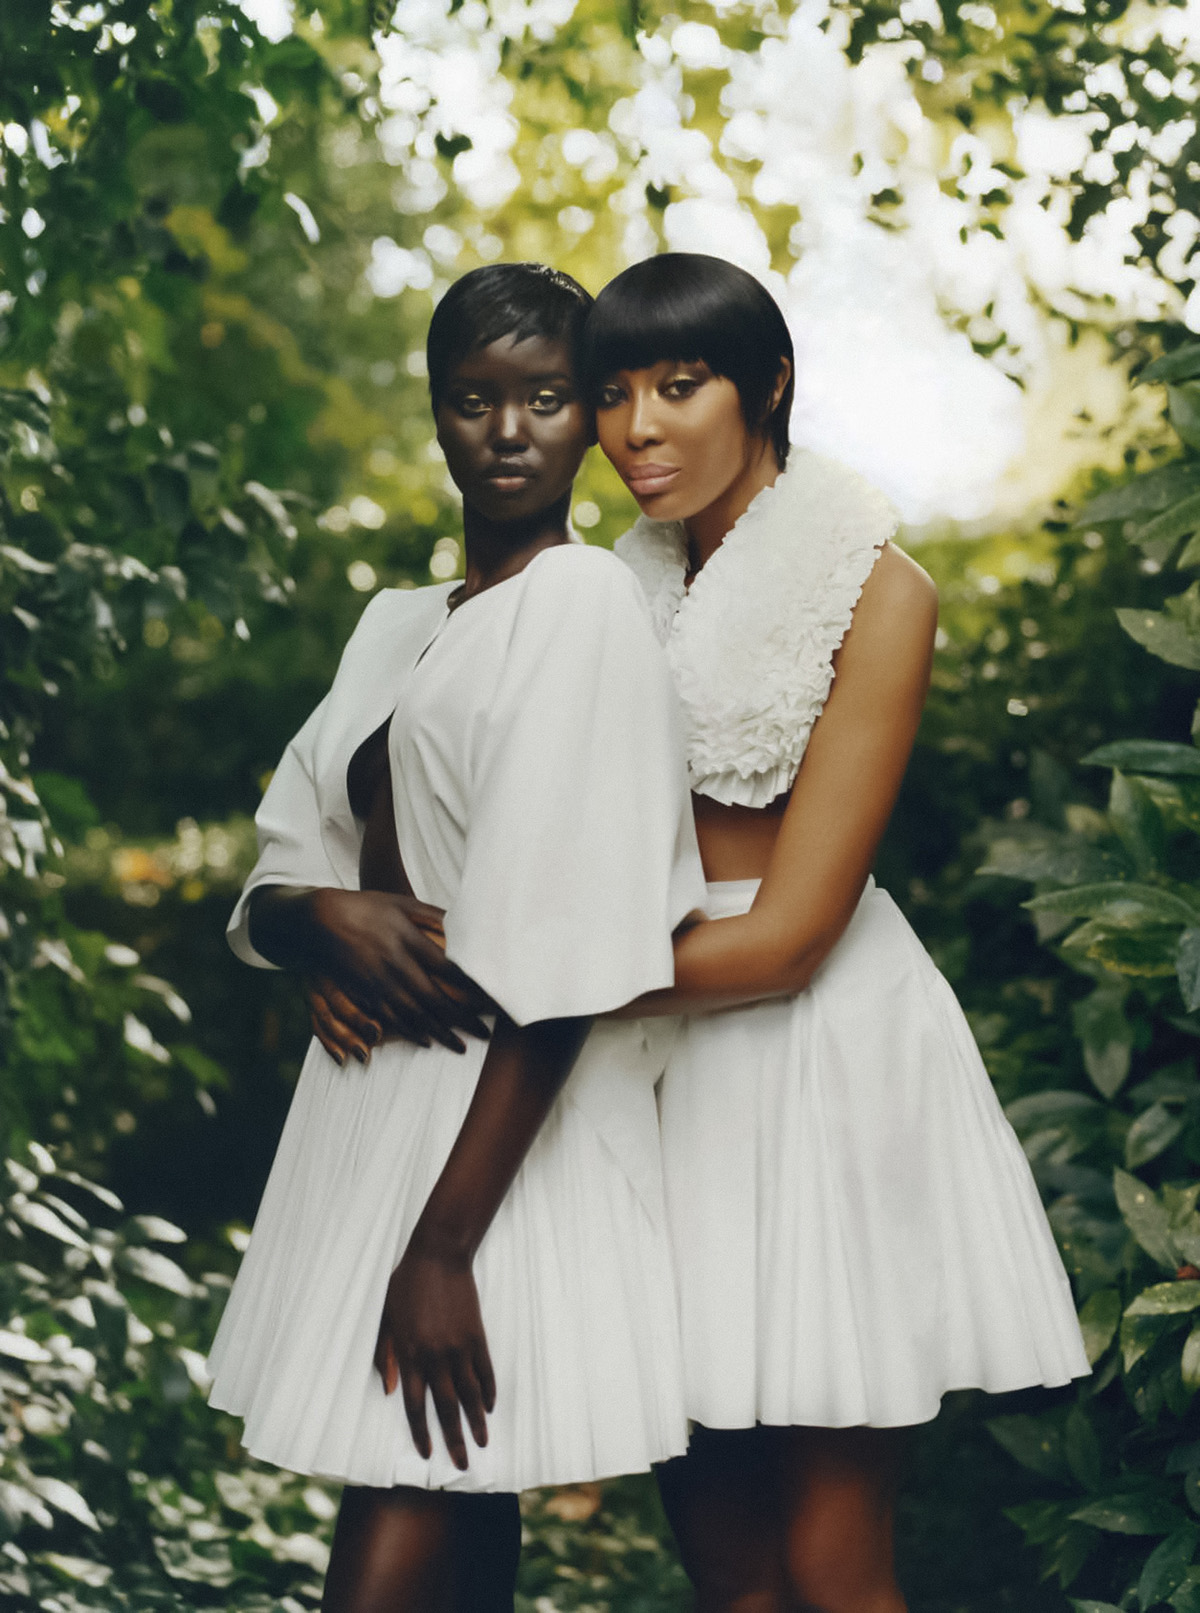 Naomi Campbell and Adut Akech by Tyler Mitchell for Vogue Italia January 2022